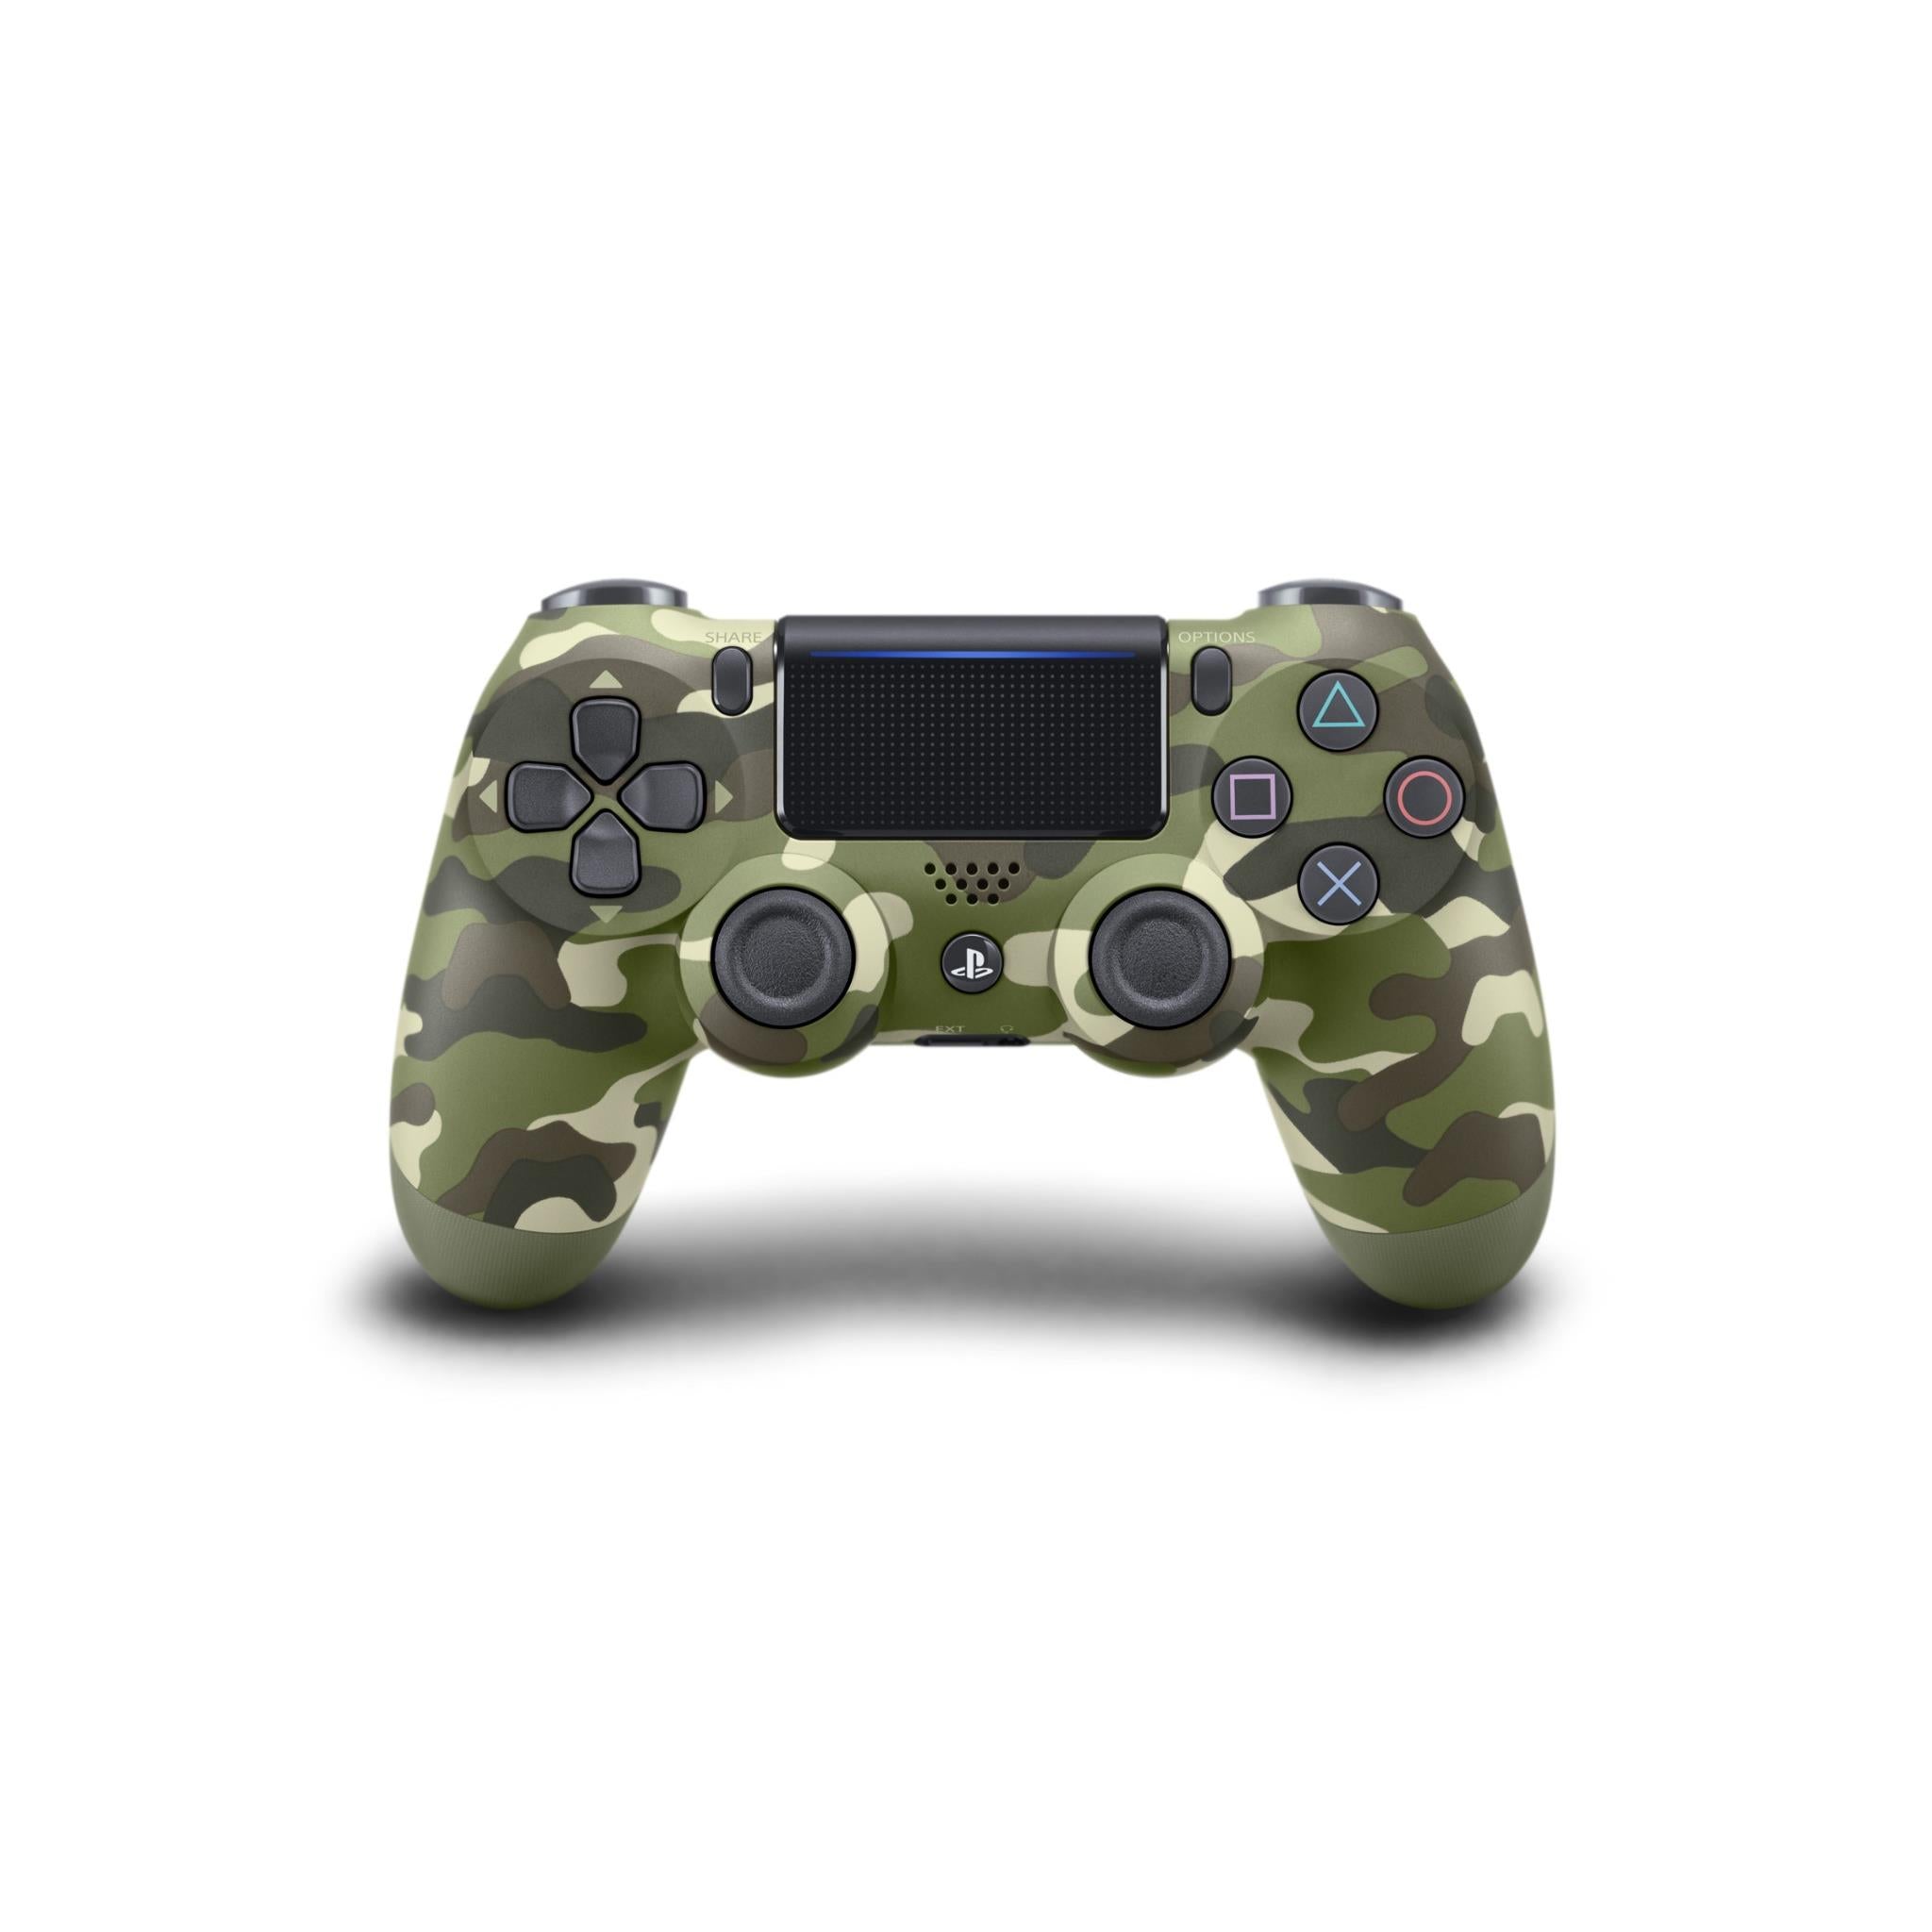 Sony Controller Game Pad per Playstation 4 PS4 Wireless Bluetooth colore  Camouflage - 9894858 DualShock 4